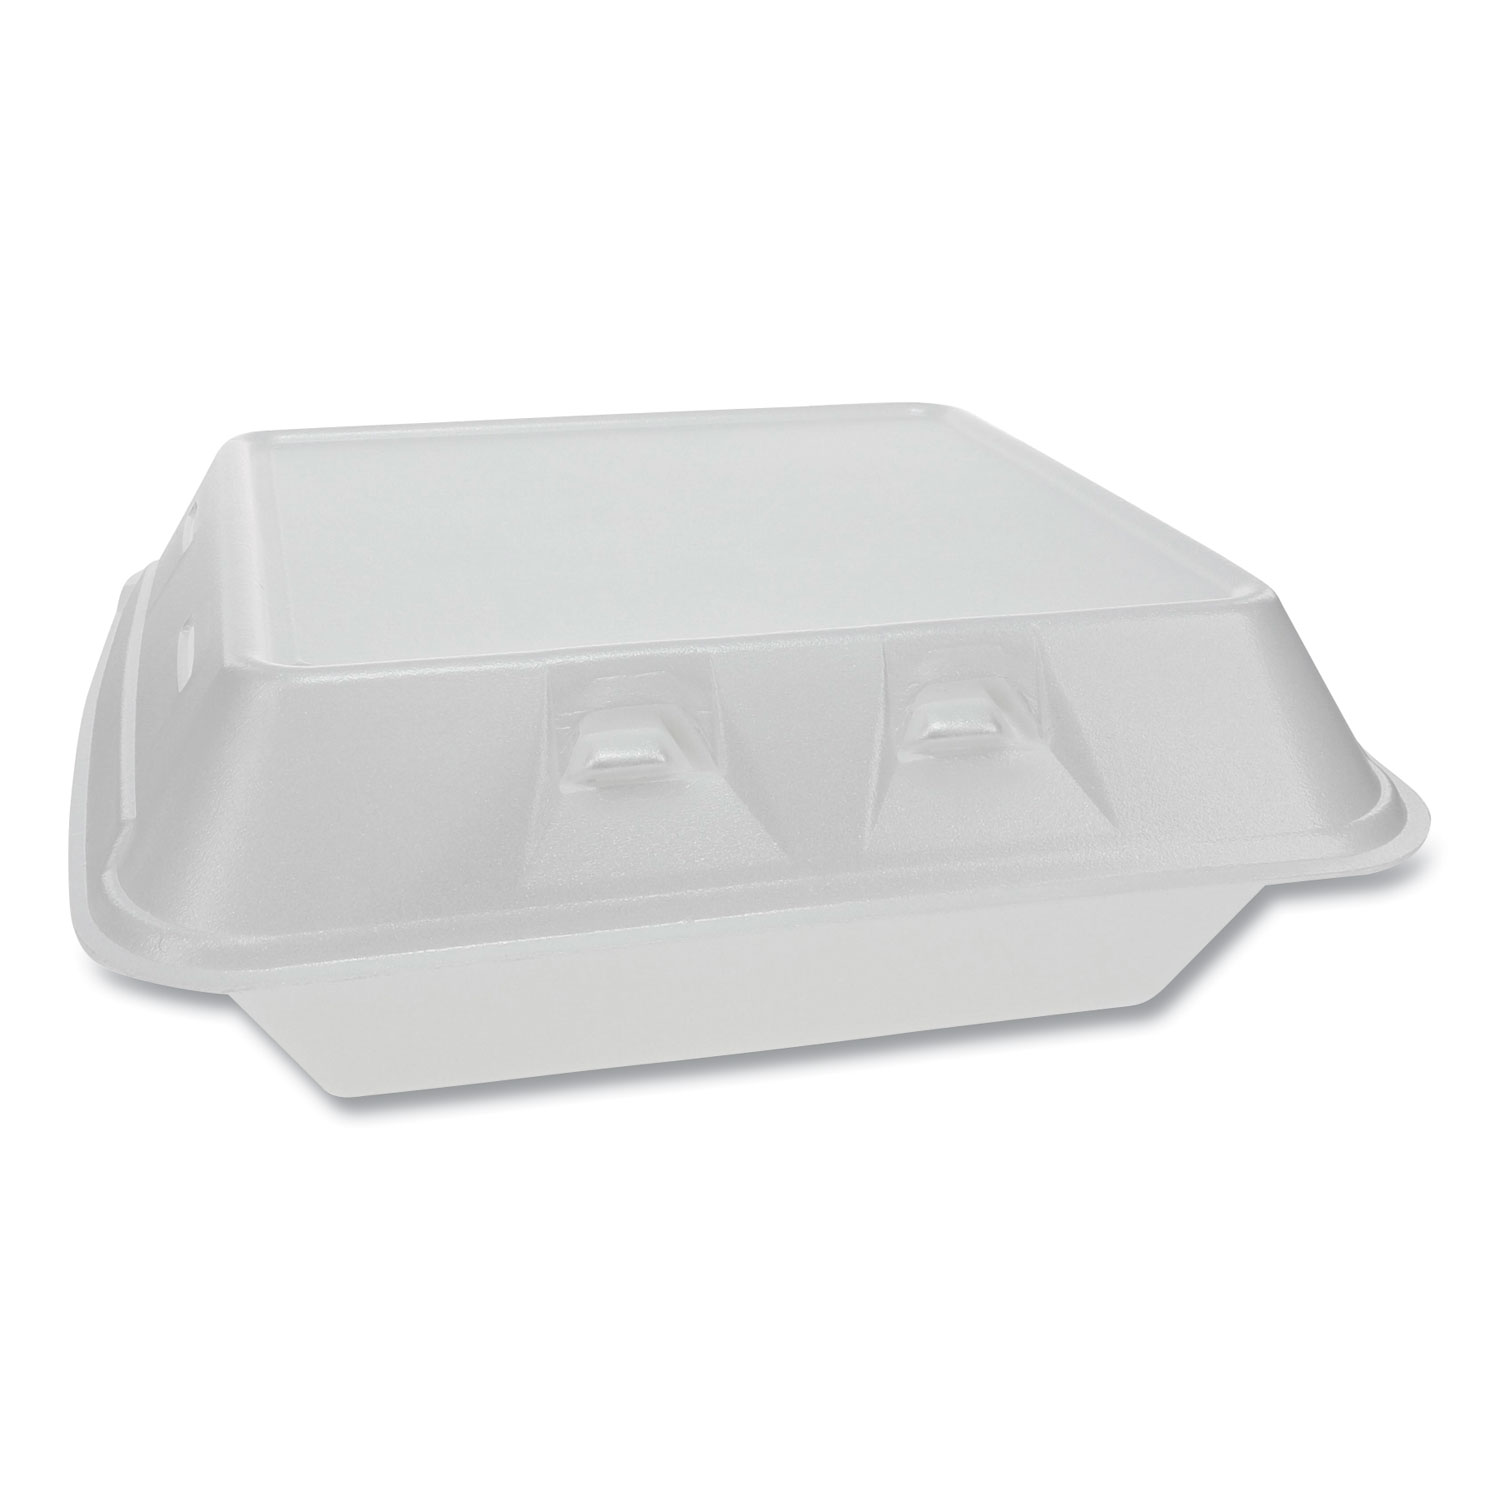  Pactiv YHLWV9030000 SmartLock Vented Foam Hinged Lid Containers, , 9 x 9.25 x 3.25, 3-Compartment, White, 150/Carton (PCTYHLWV9030000) 